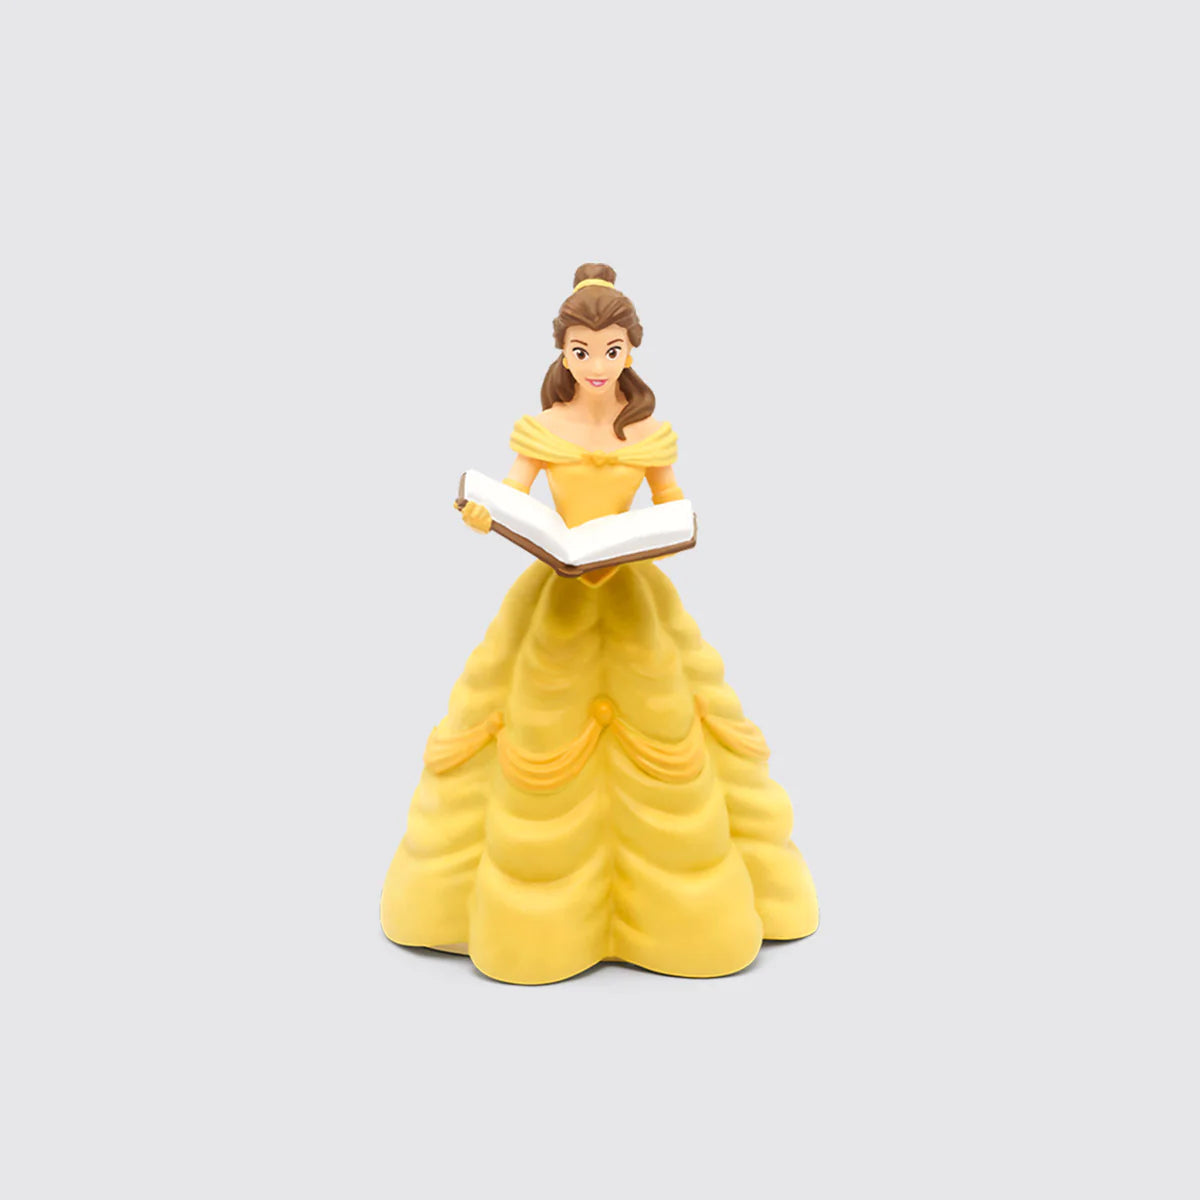 Tonies-Tonies Characters - Beauty and the Beast-10000656-Legacy Toys